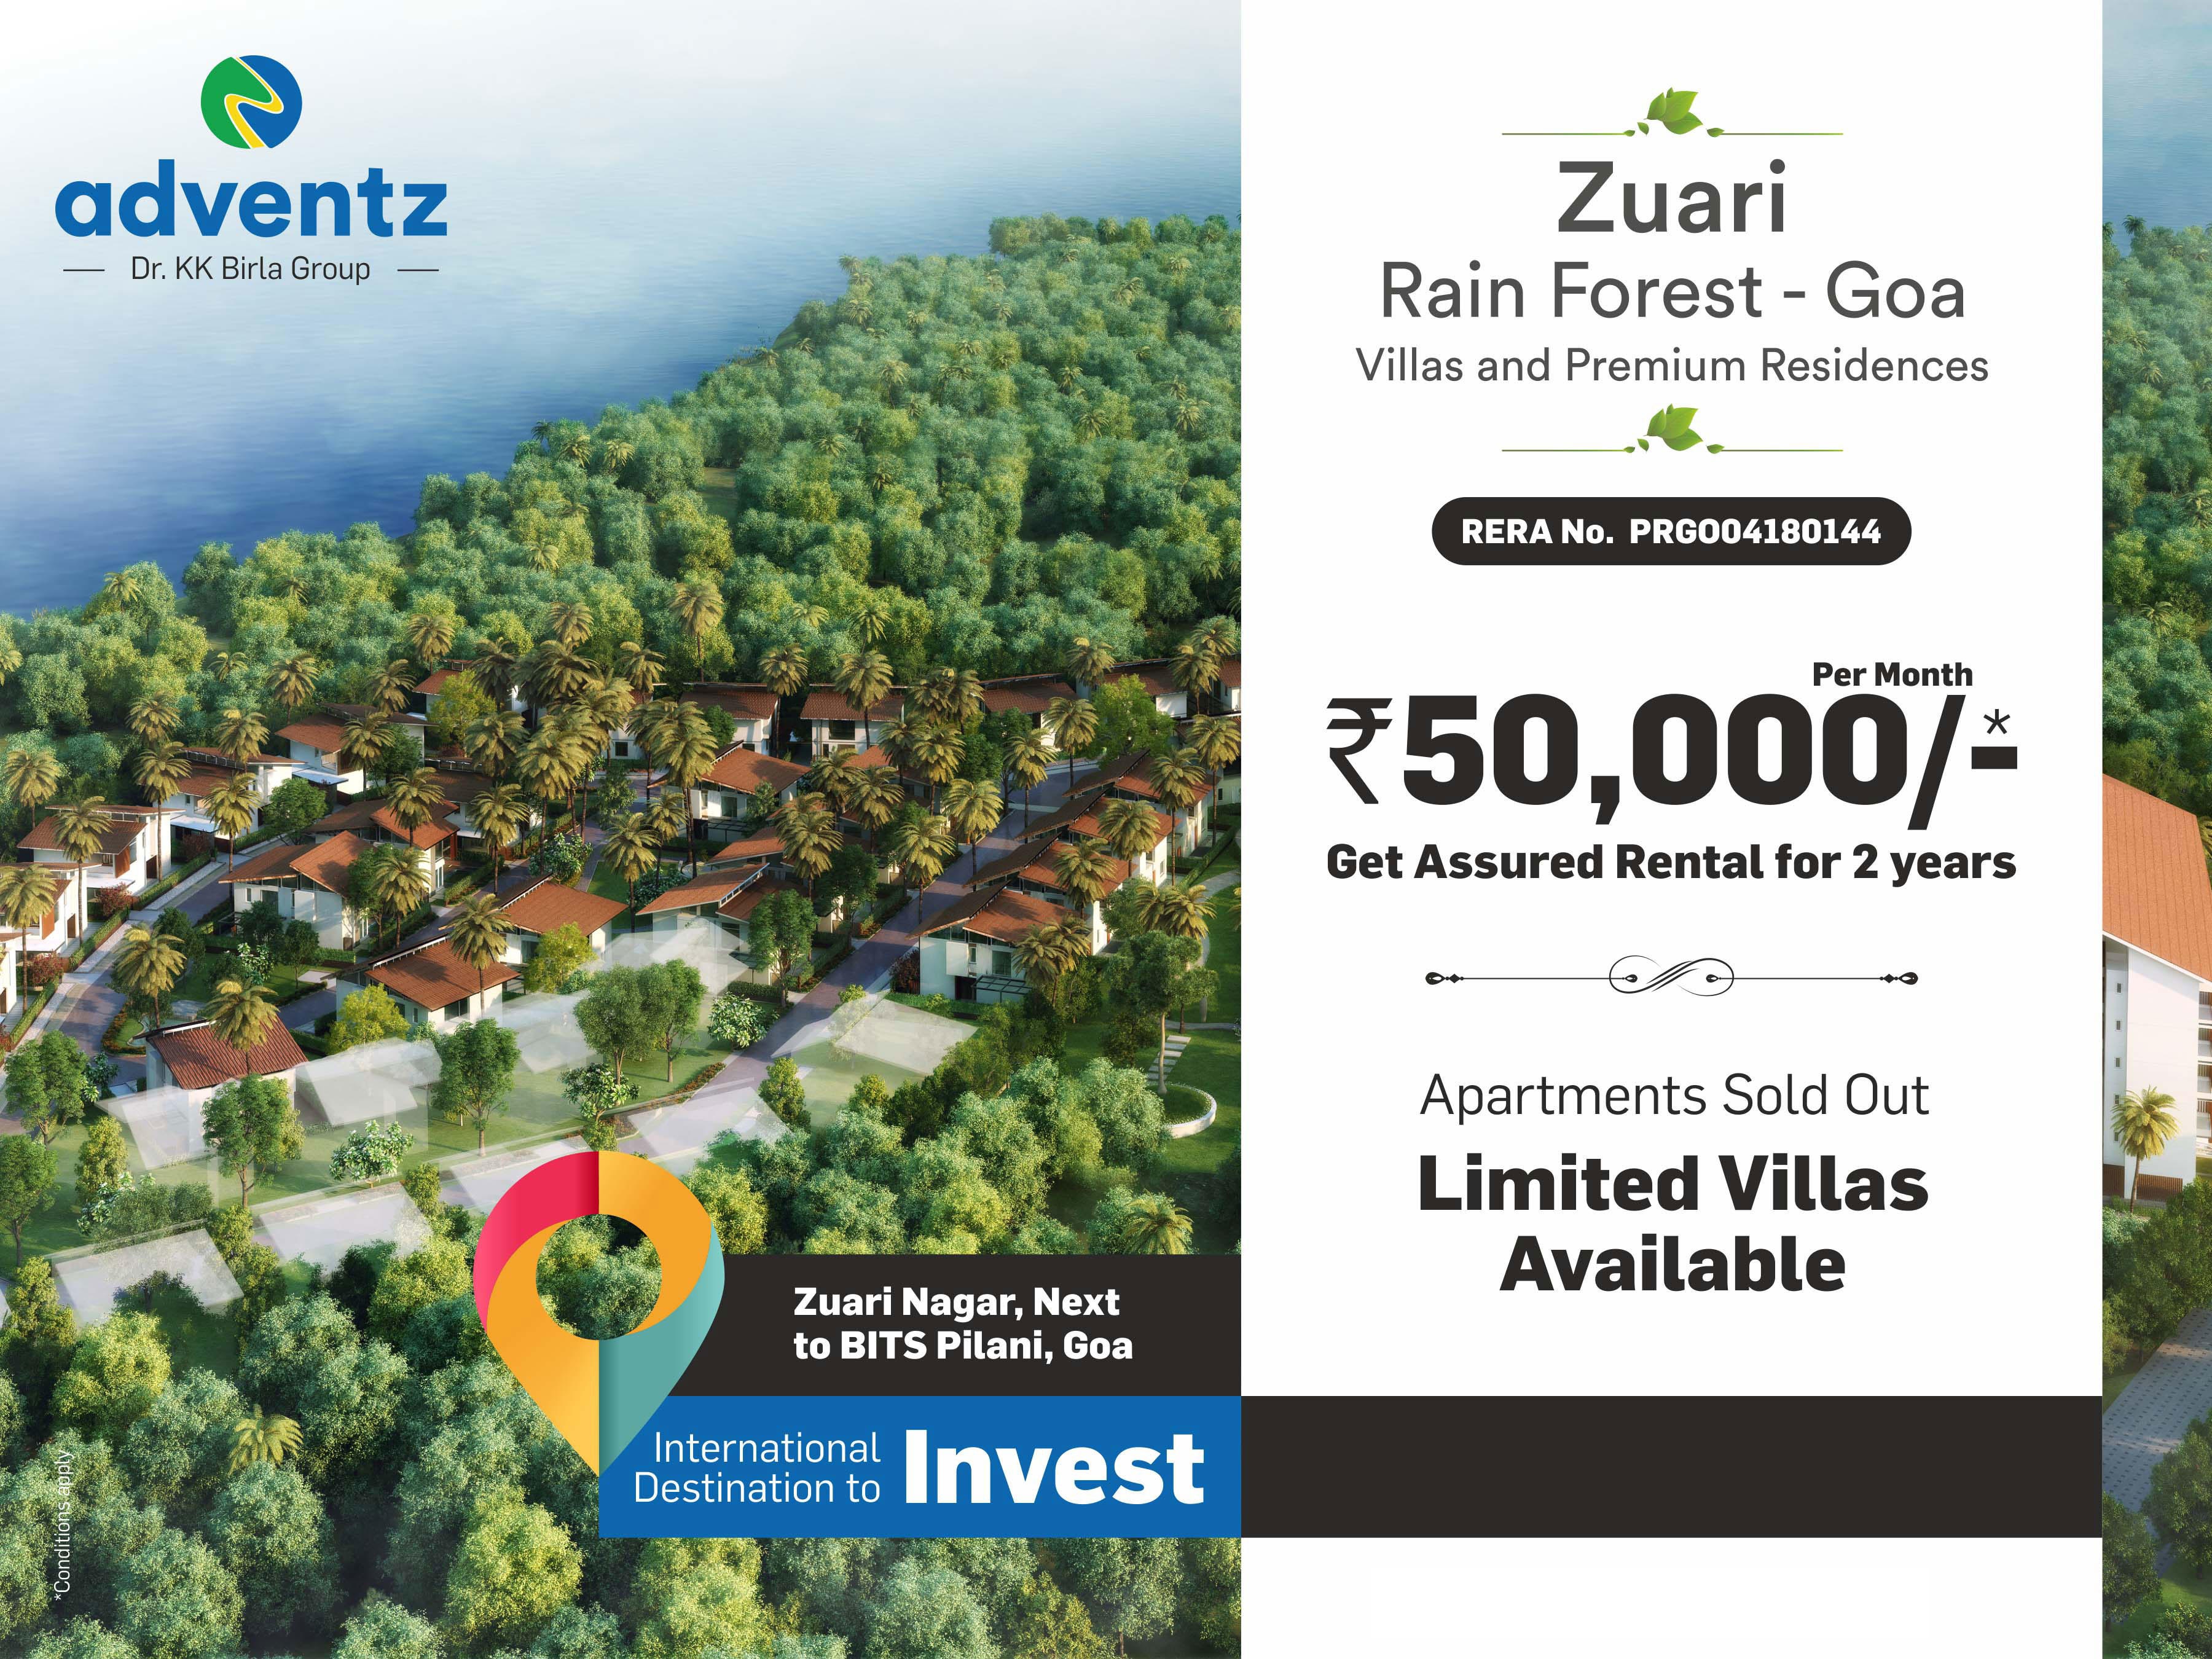 Get assured rental of Rs. 50,000 for 2 years at Zuari Rain Forest in Goa